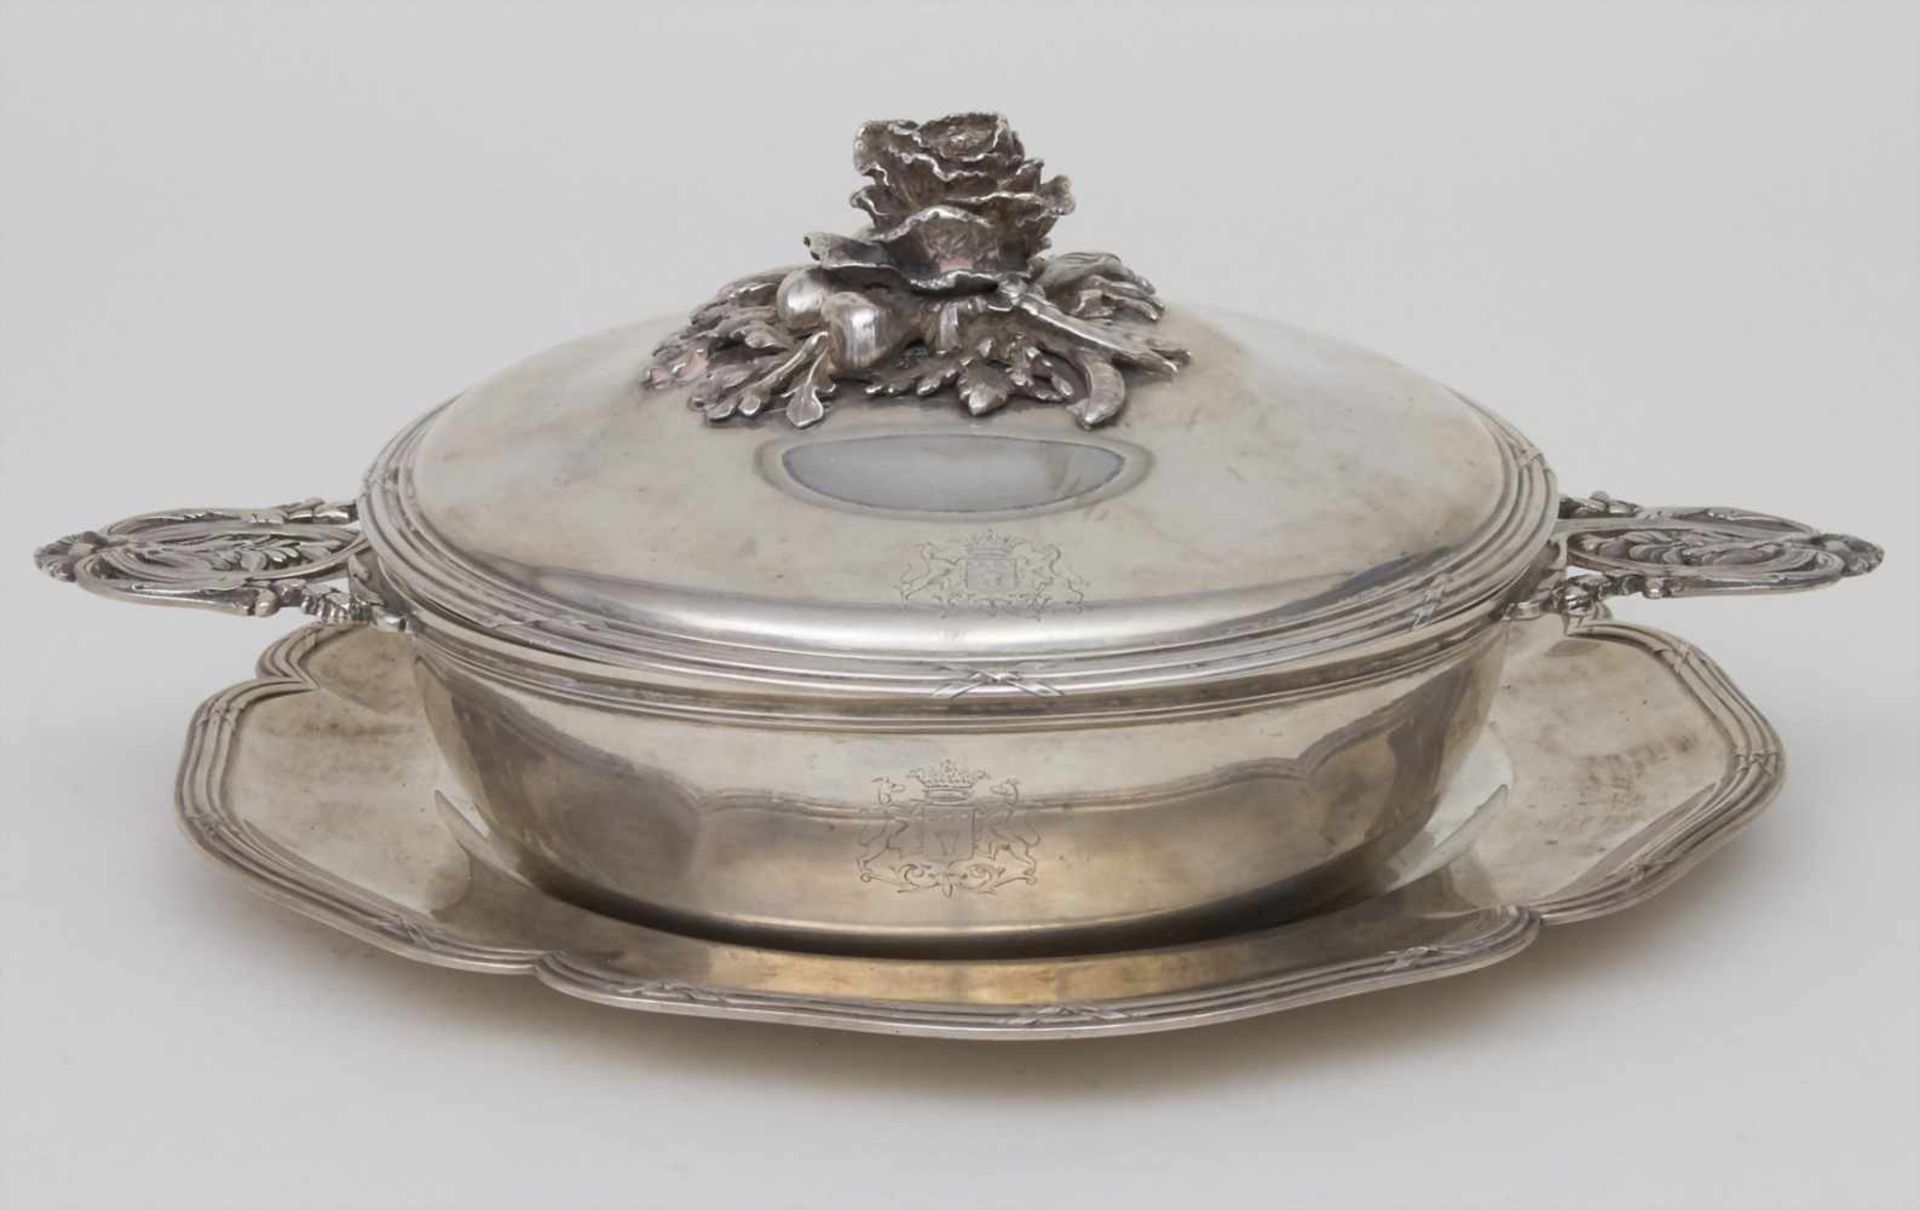 Legumier / Wöchnerinnenschüssel / A silver vegetable tureen with lining and cover, Stanislas Pollet,